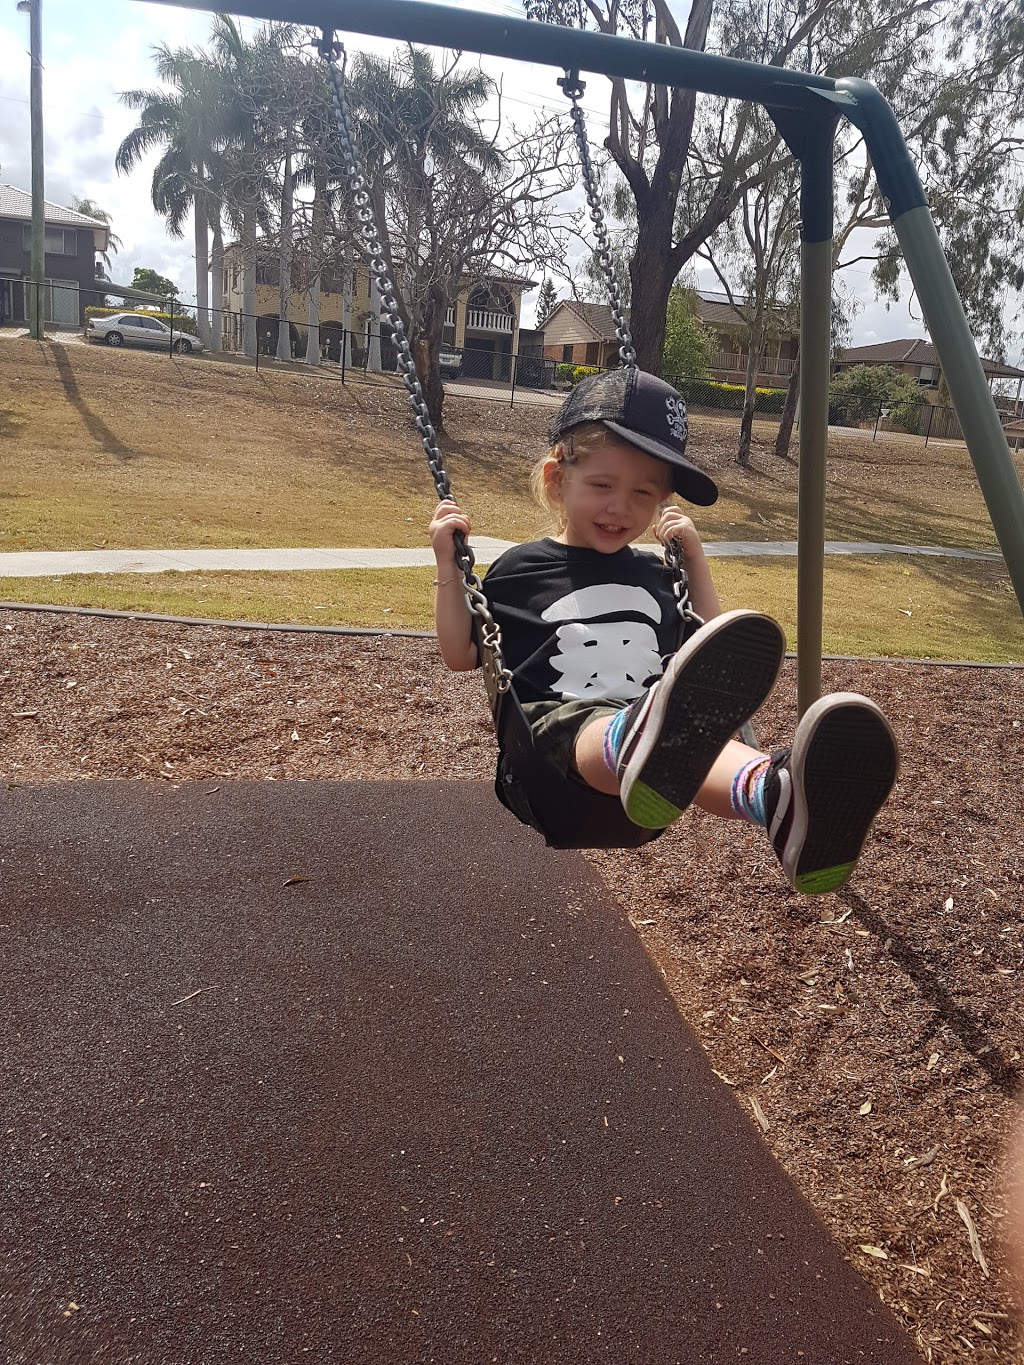 Nixon Park Oxley | park | 929 Oxley Rd, Oxley QLD 4075, Australia | 133263 OR +61 133263